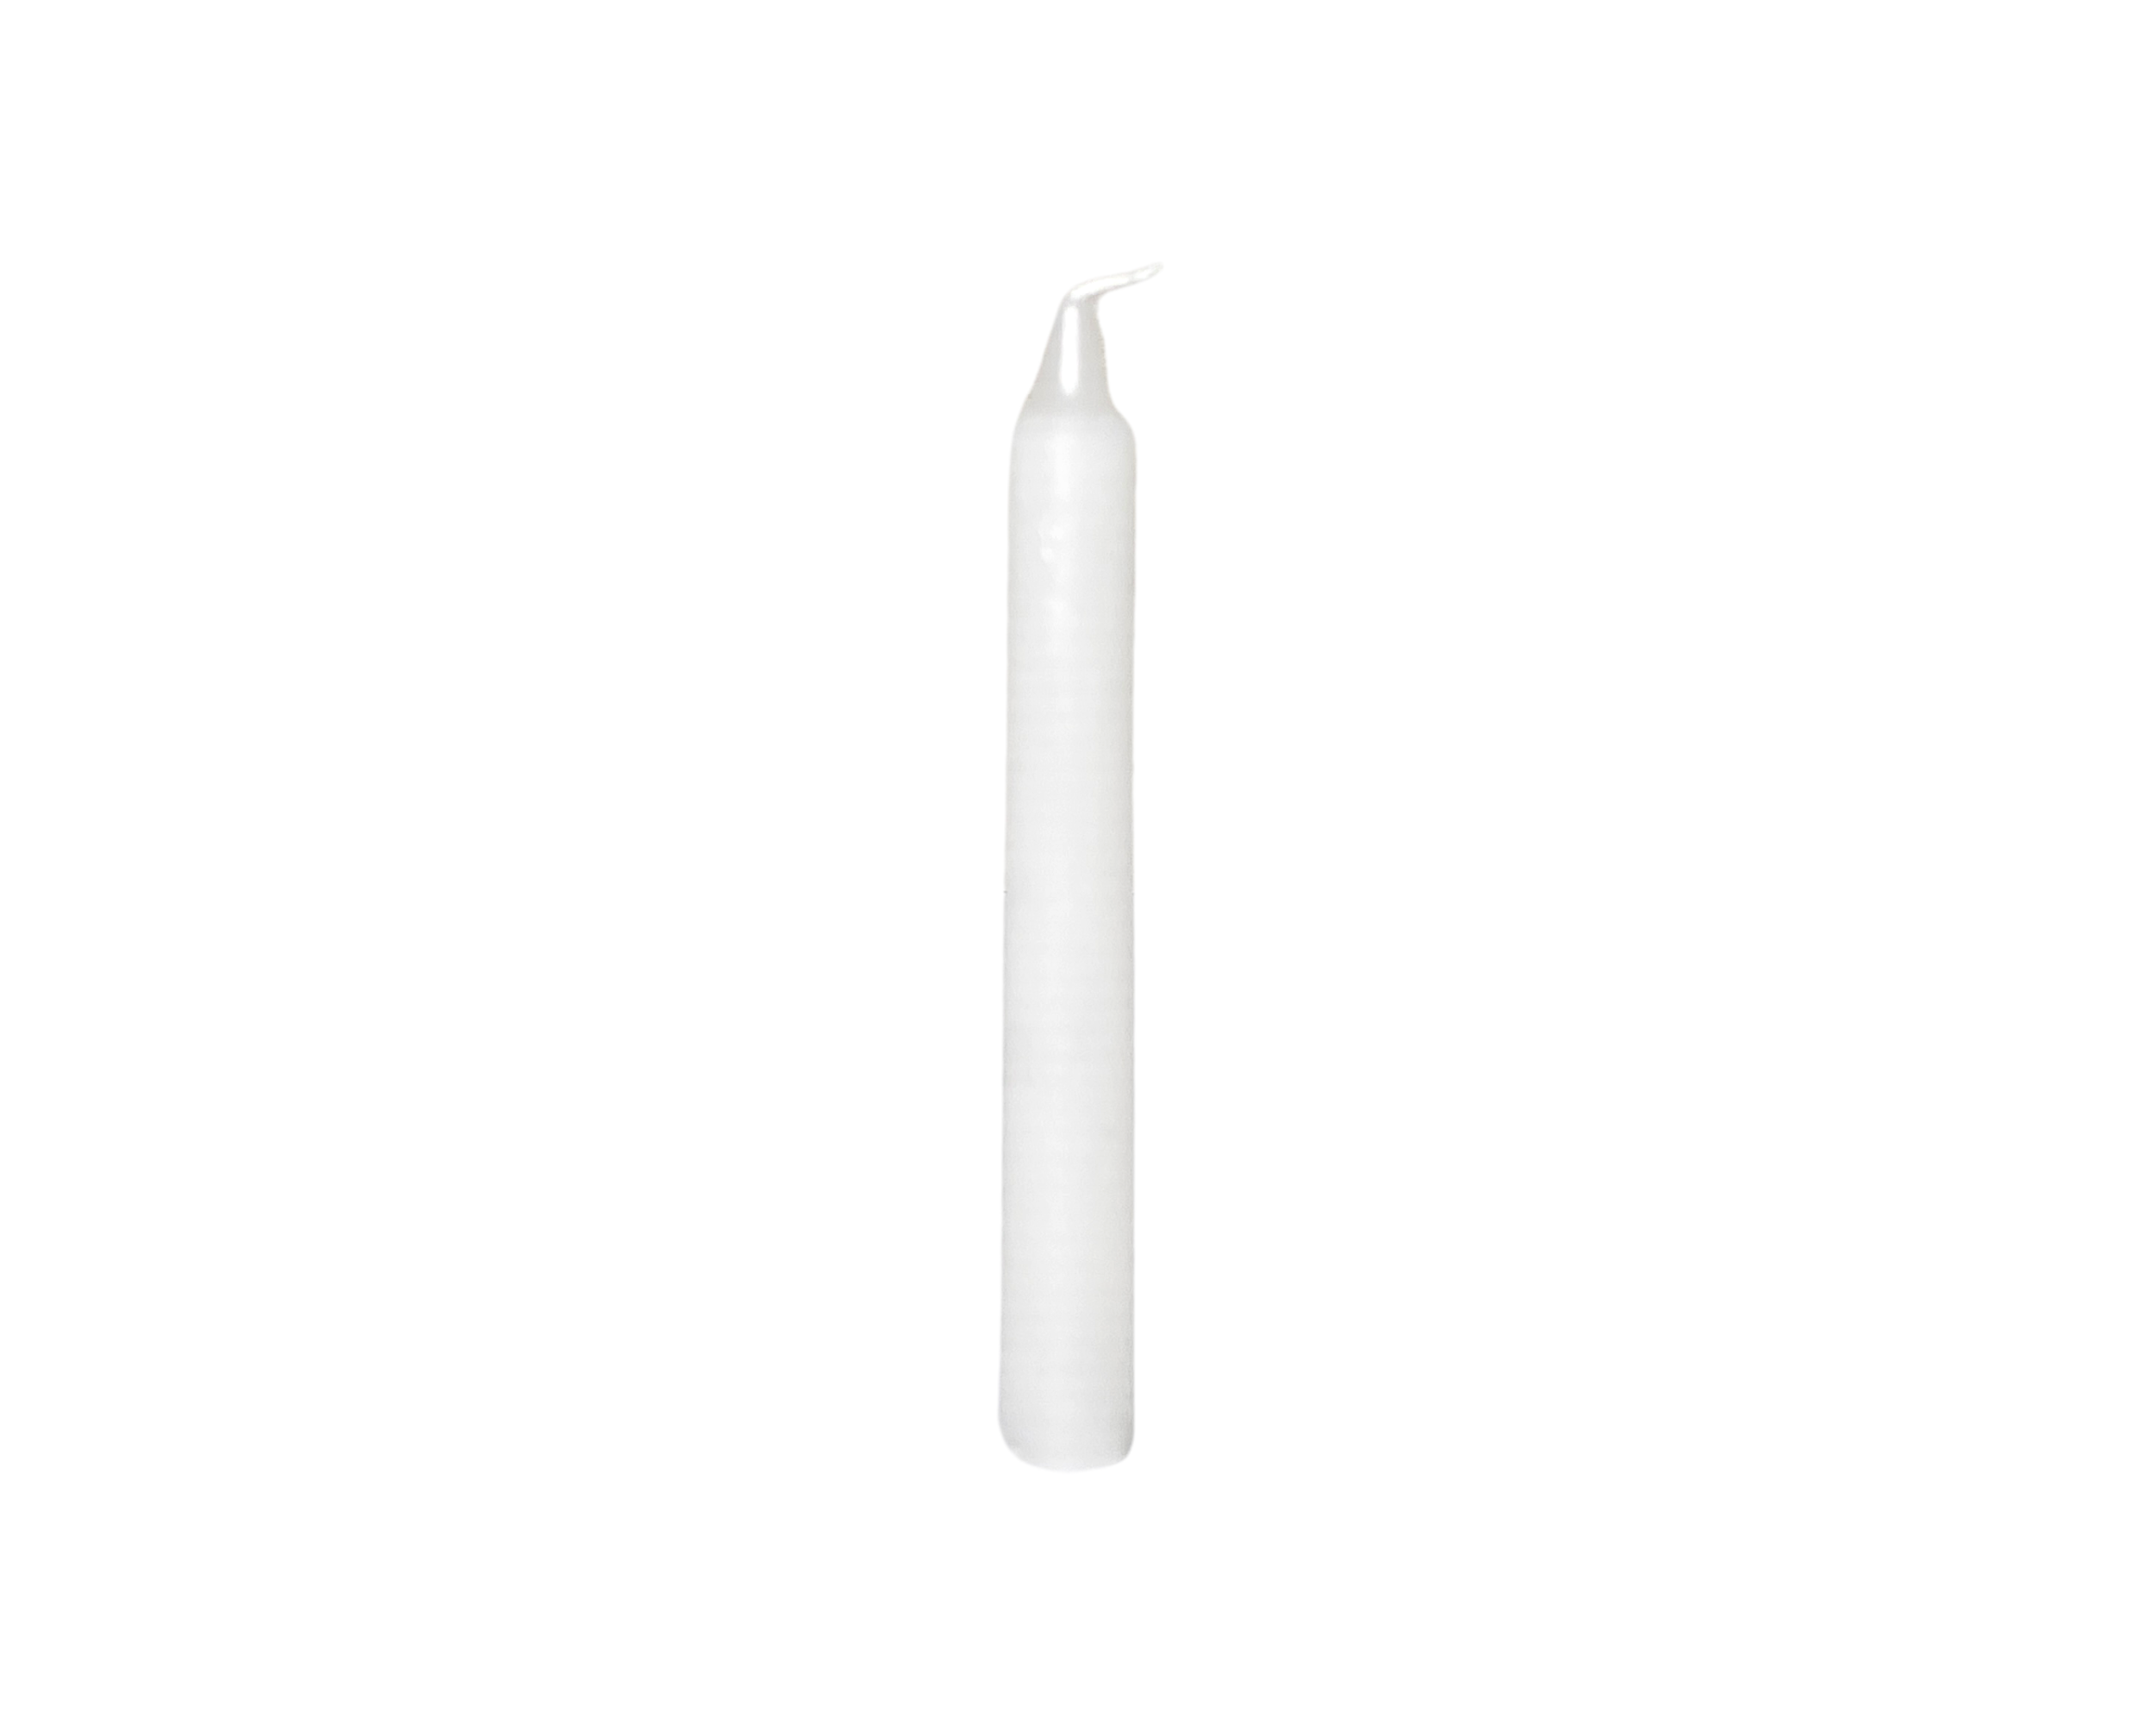 Buy Online Latest and Unique White Chime Candles - Protection, Repelling, Banishing | Shop Best Spiritual Items - The Mystical Ritual